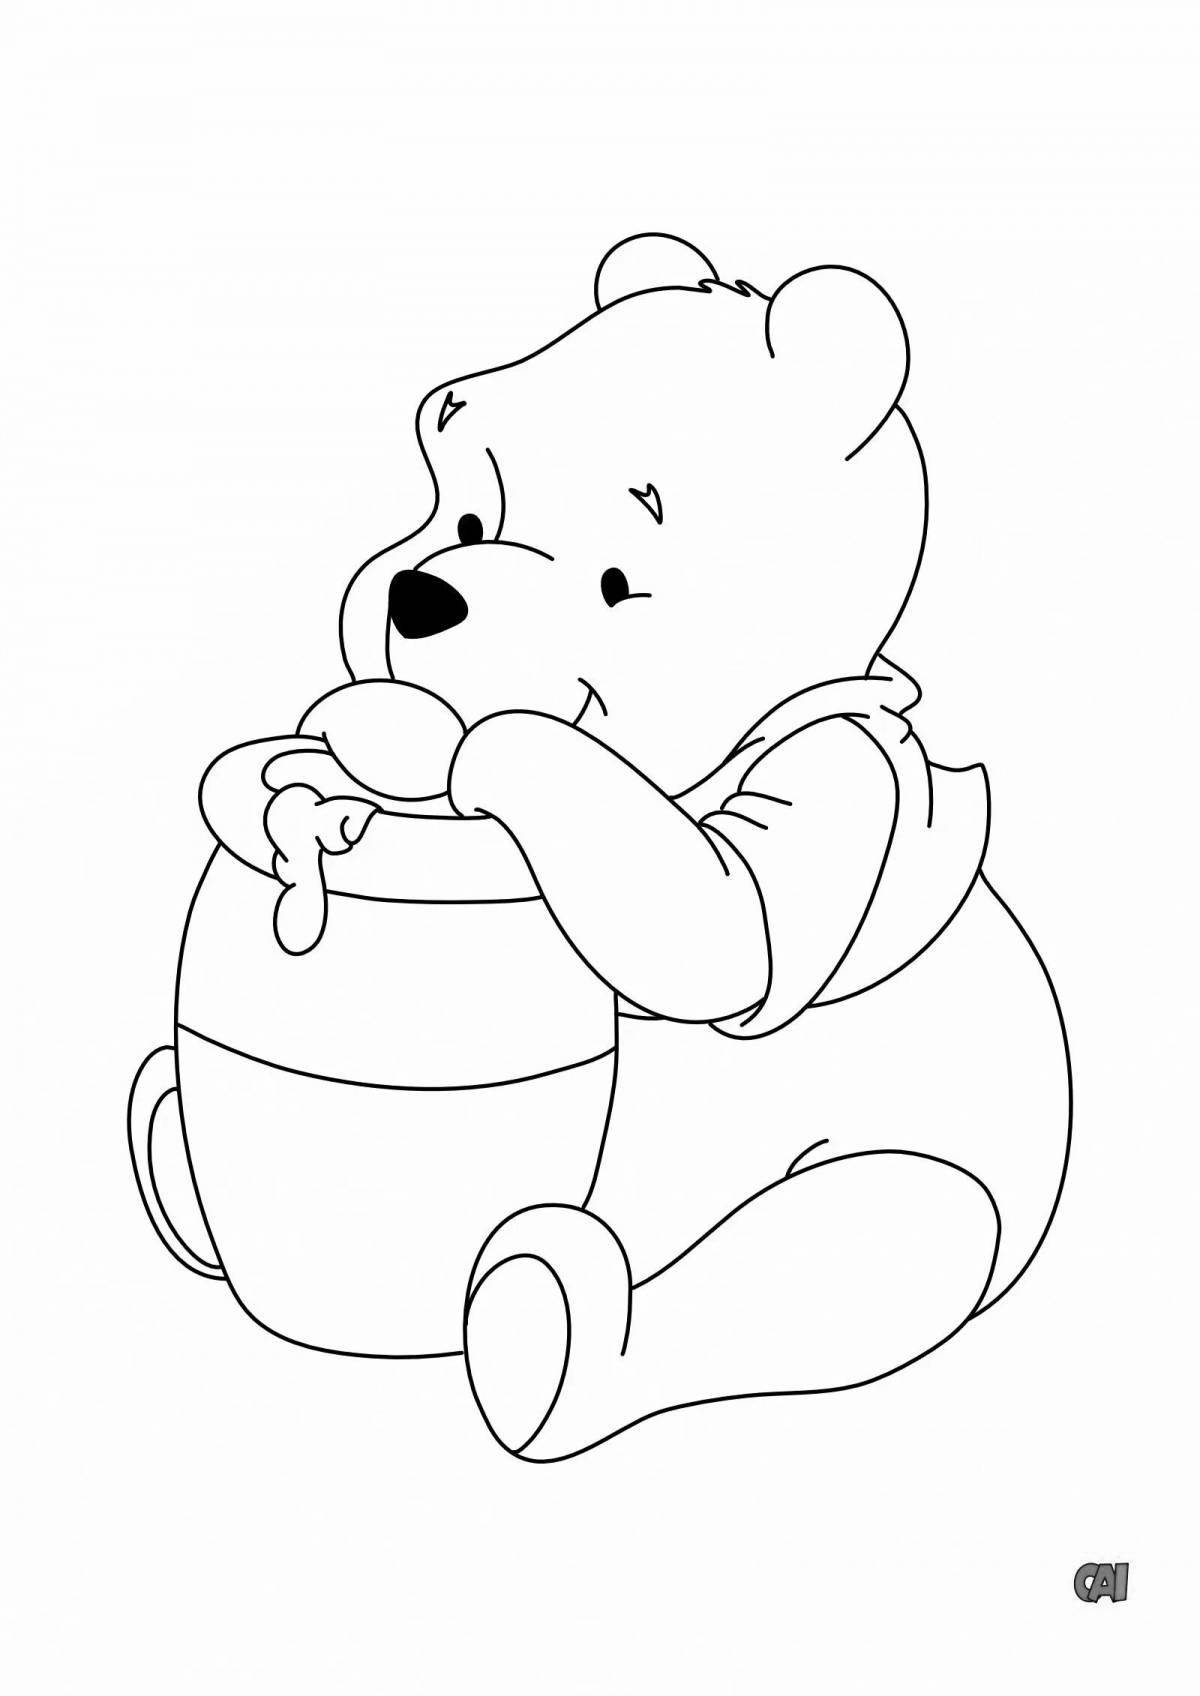 Live bear with honey coloring